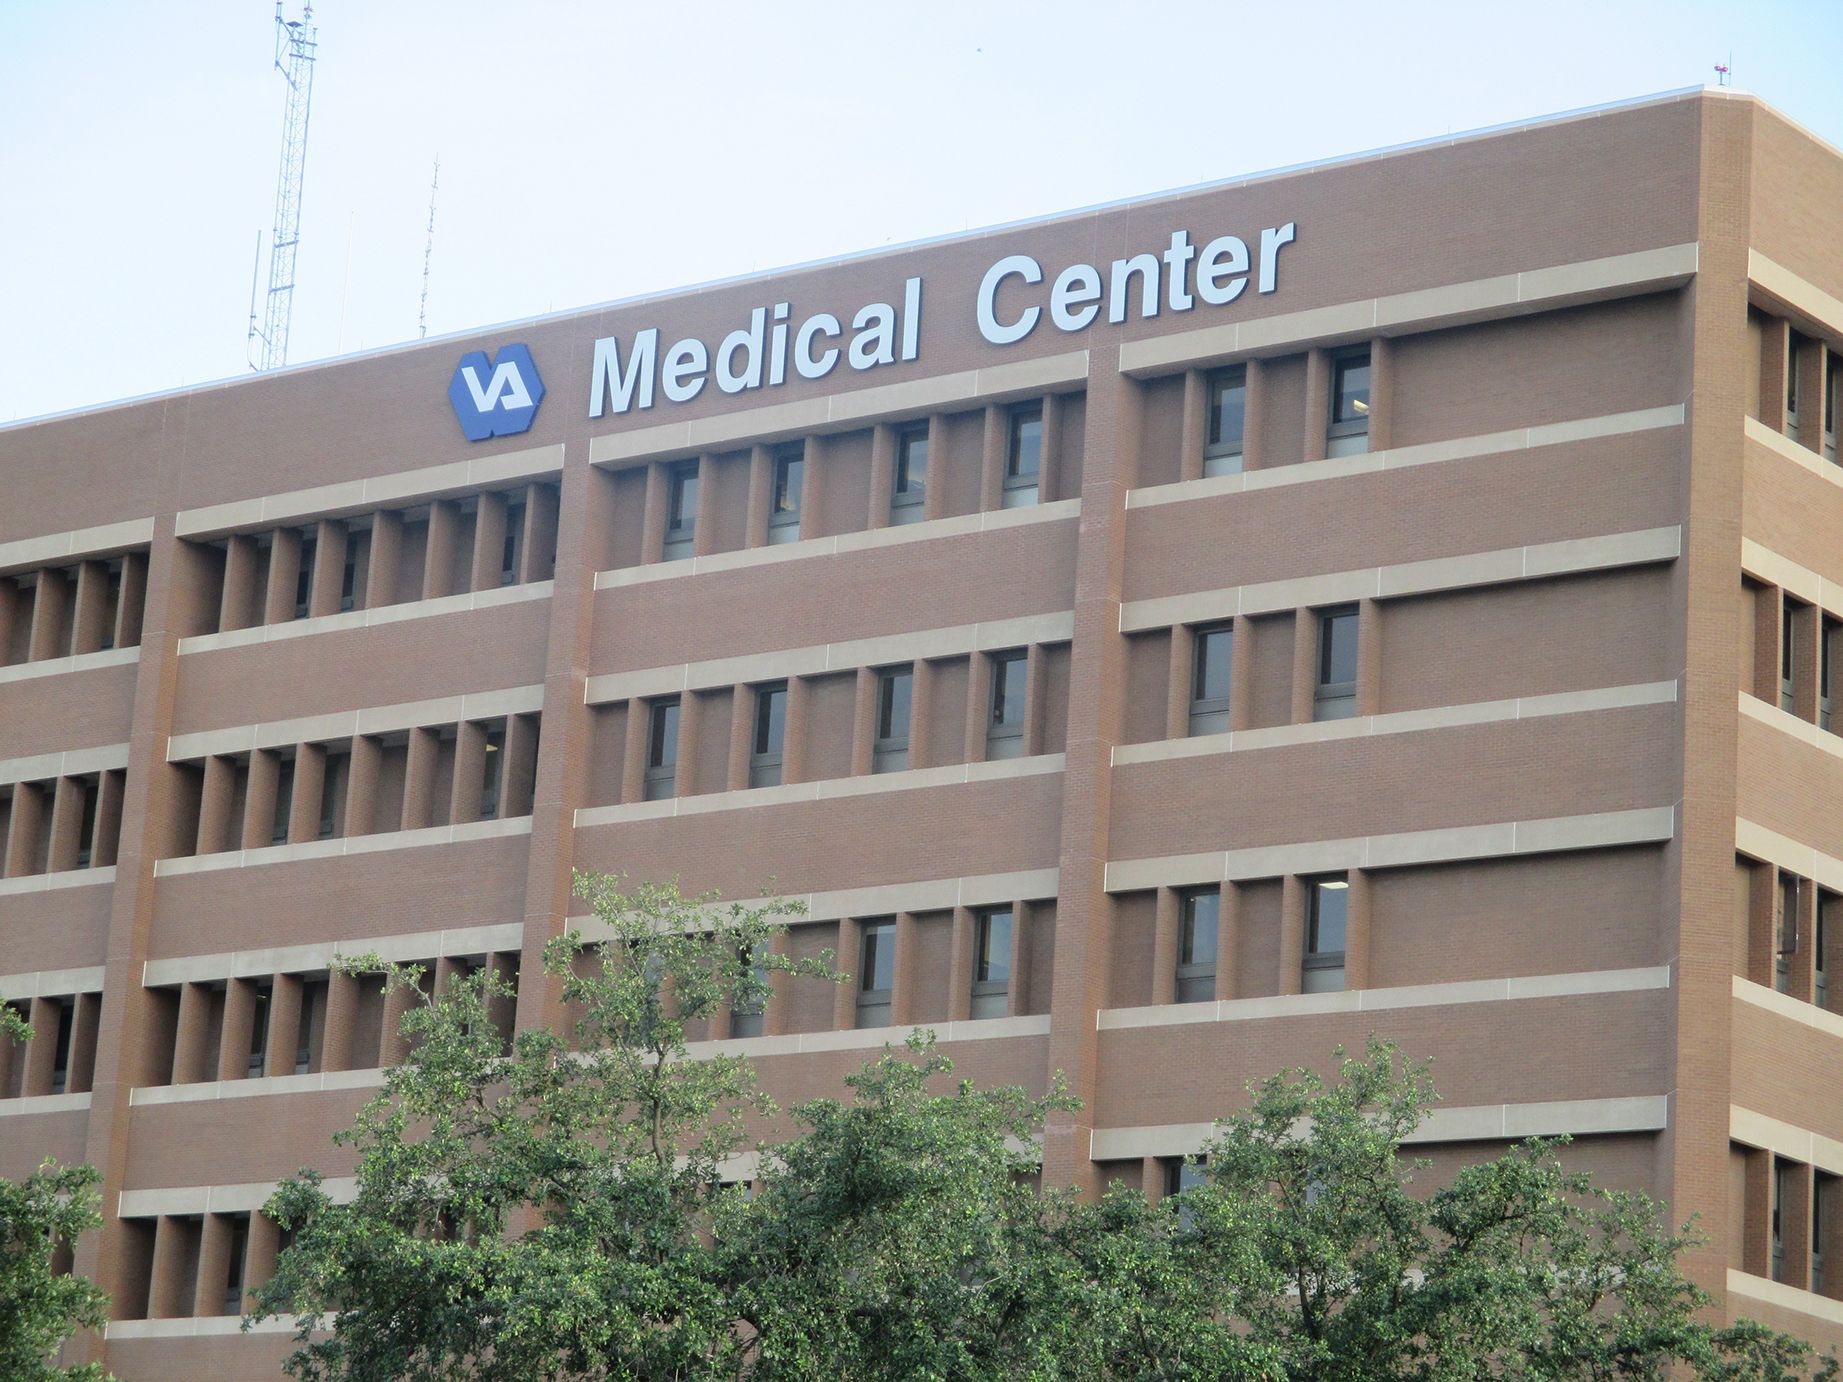 Veterans Affairs (VA) hospitals and medical centers across the U.S. have turned to secure messaging solutions